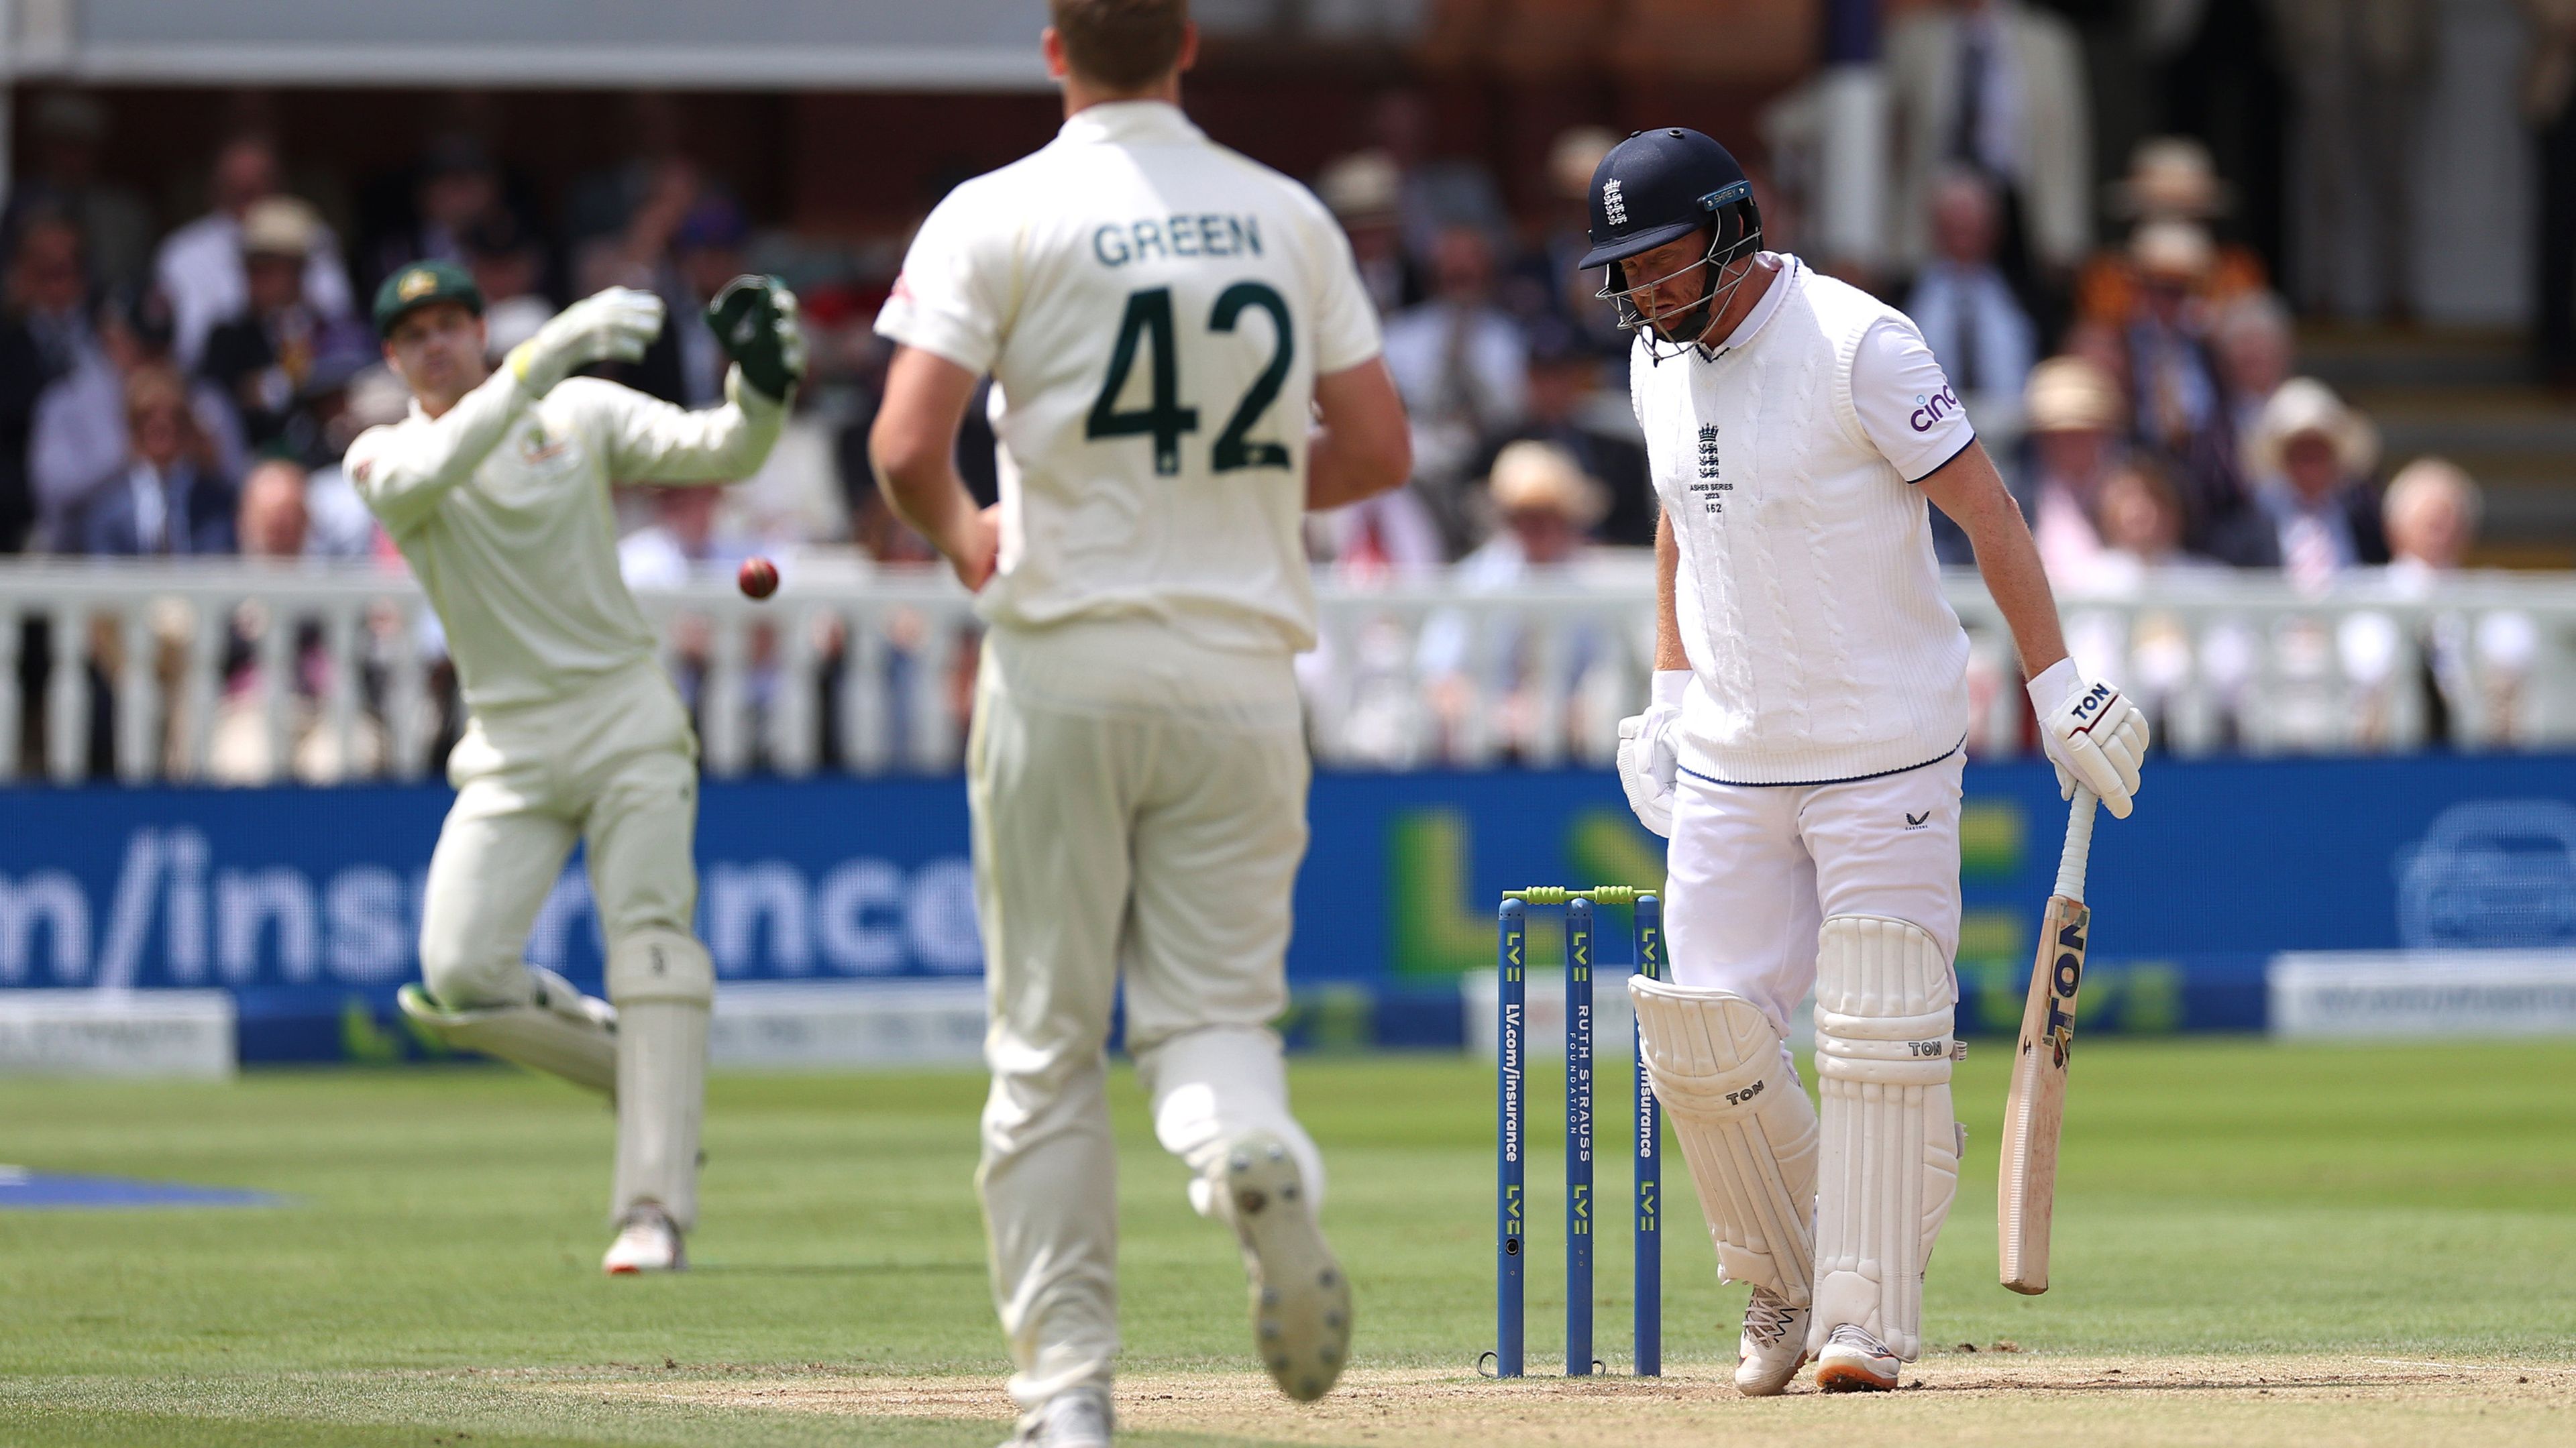 Jonny Bairstow wanders from his crease as Australia&#x27;s Alex Carey throws the ball at his strumps, getting England&#x27;s batter out.